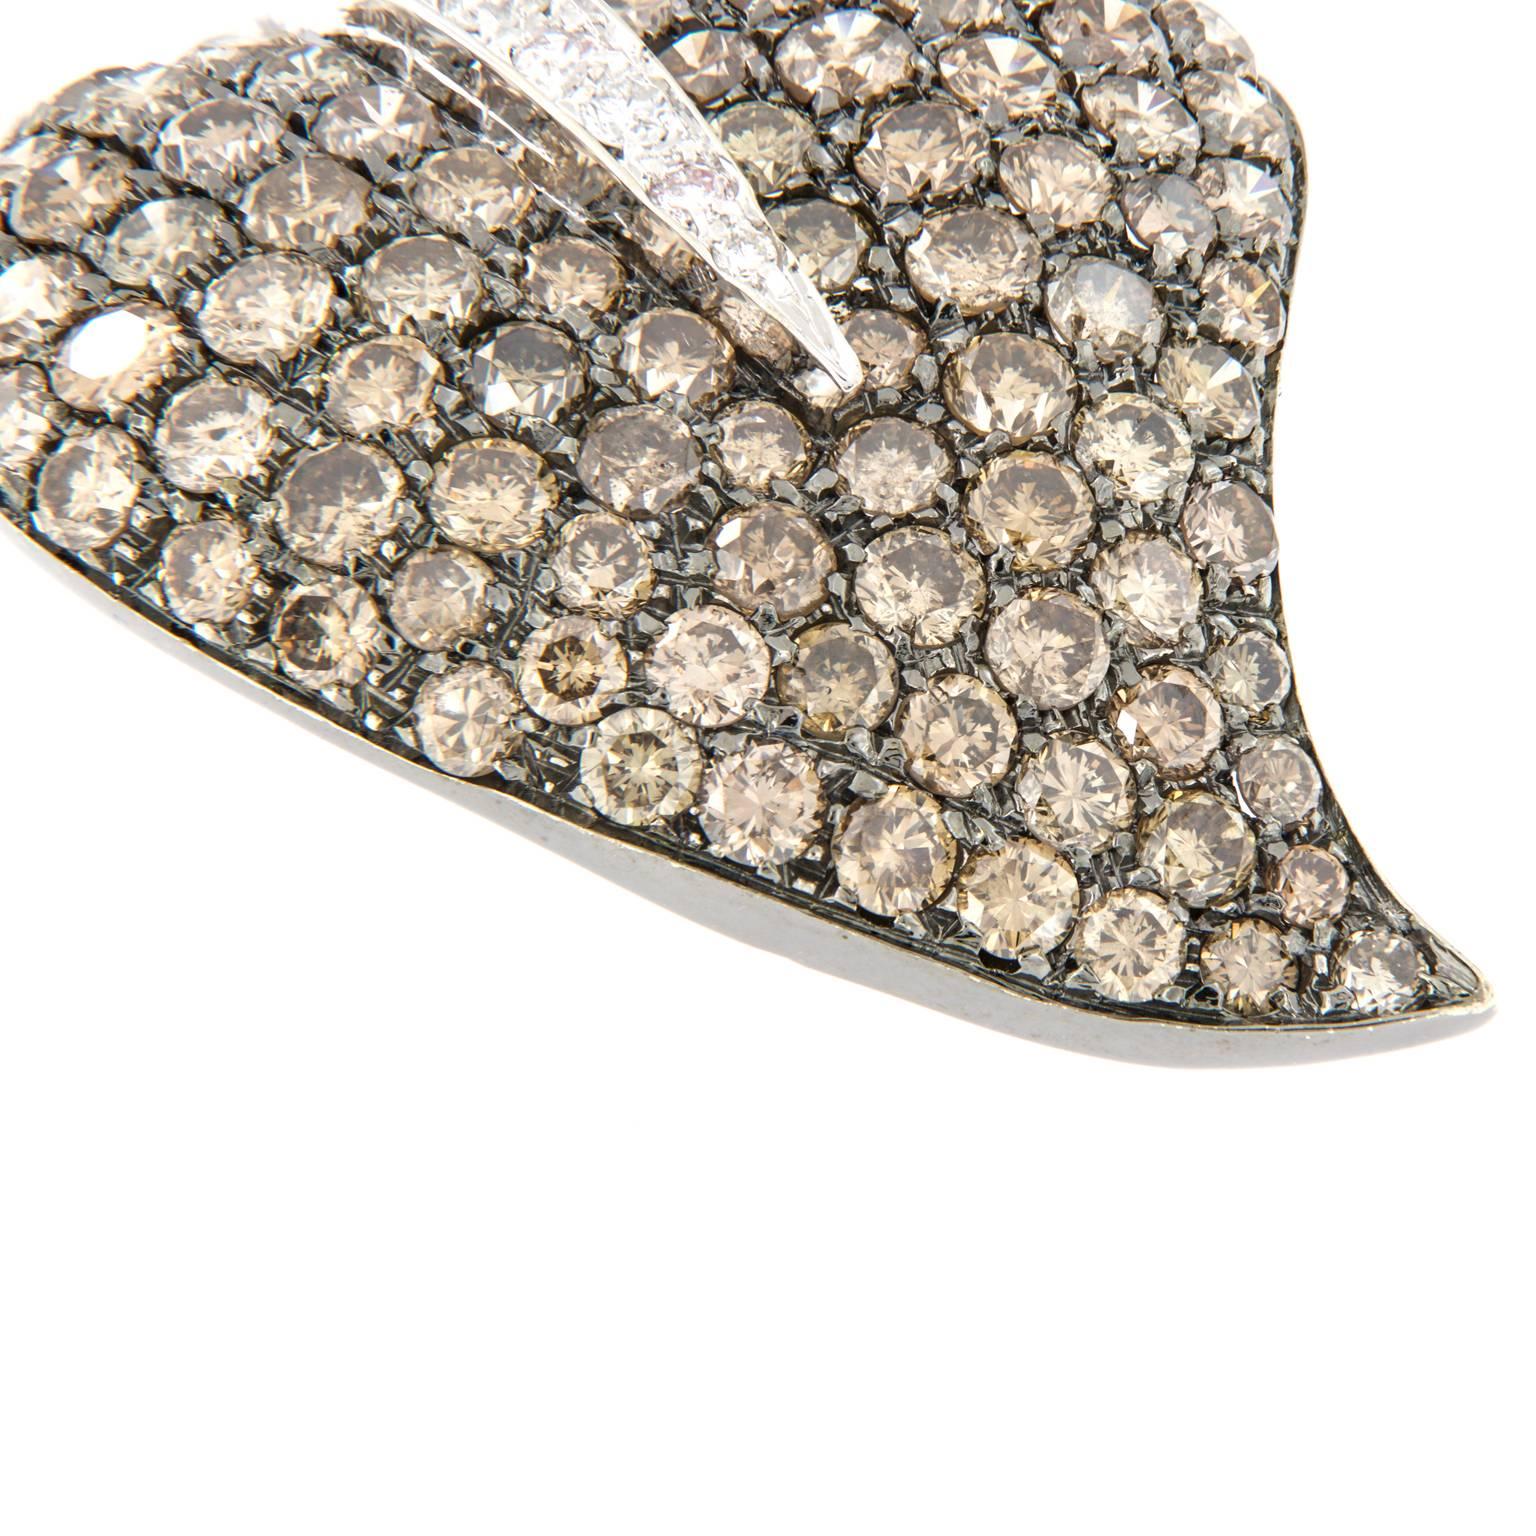 This estate stylized 18k white gold leaf brooch is pave set with 5.00 Cttw. white and chocolate diamonds. Can also be worn as a pendant & has a double prong pin for security

Diamonds 5.0 cttw est.
27 x 37mm